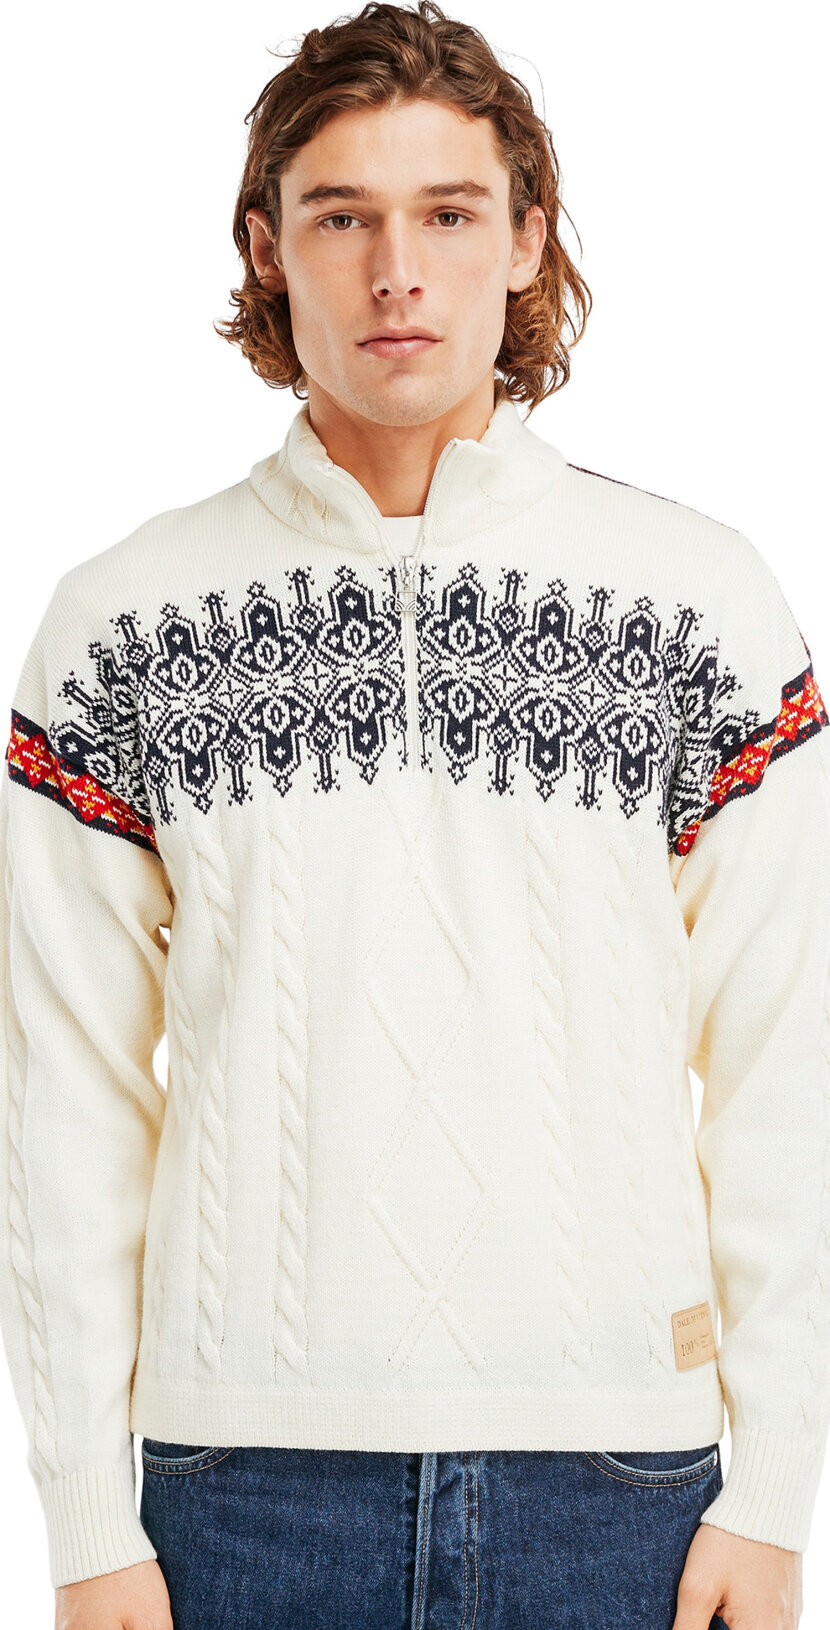 Aspøy Mens Sweater Norway COLDSEASON.com, of - 199,90 White by € Dale 